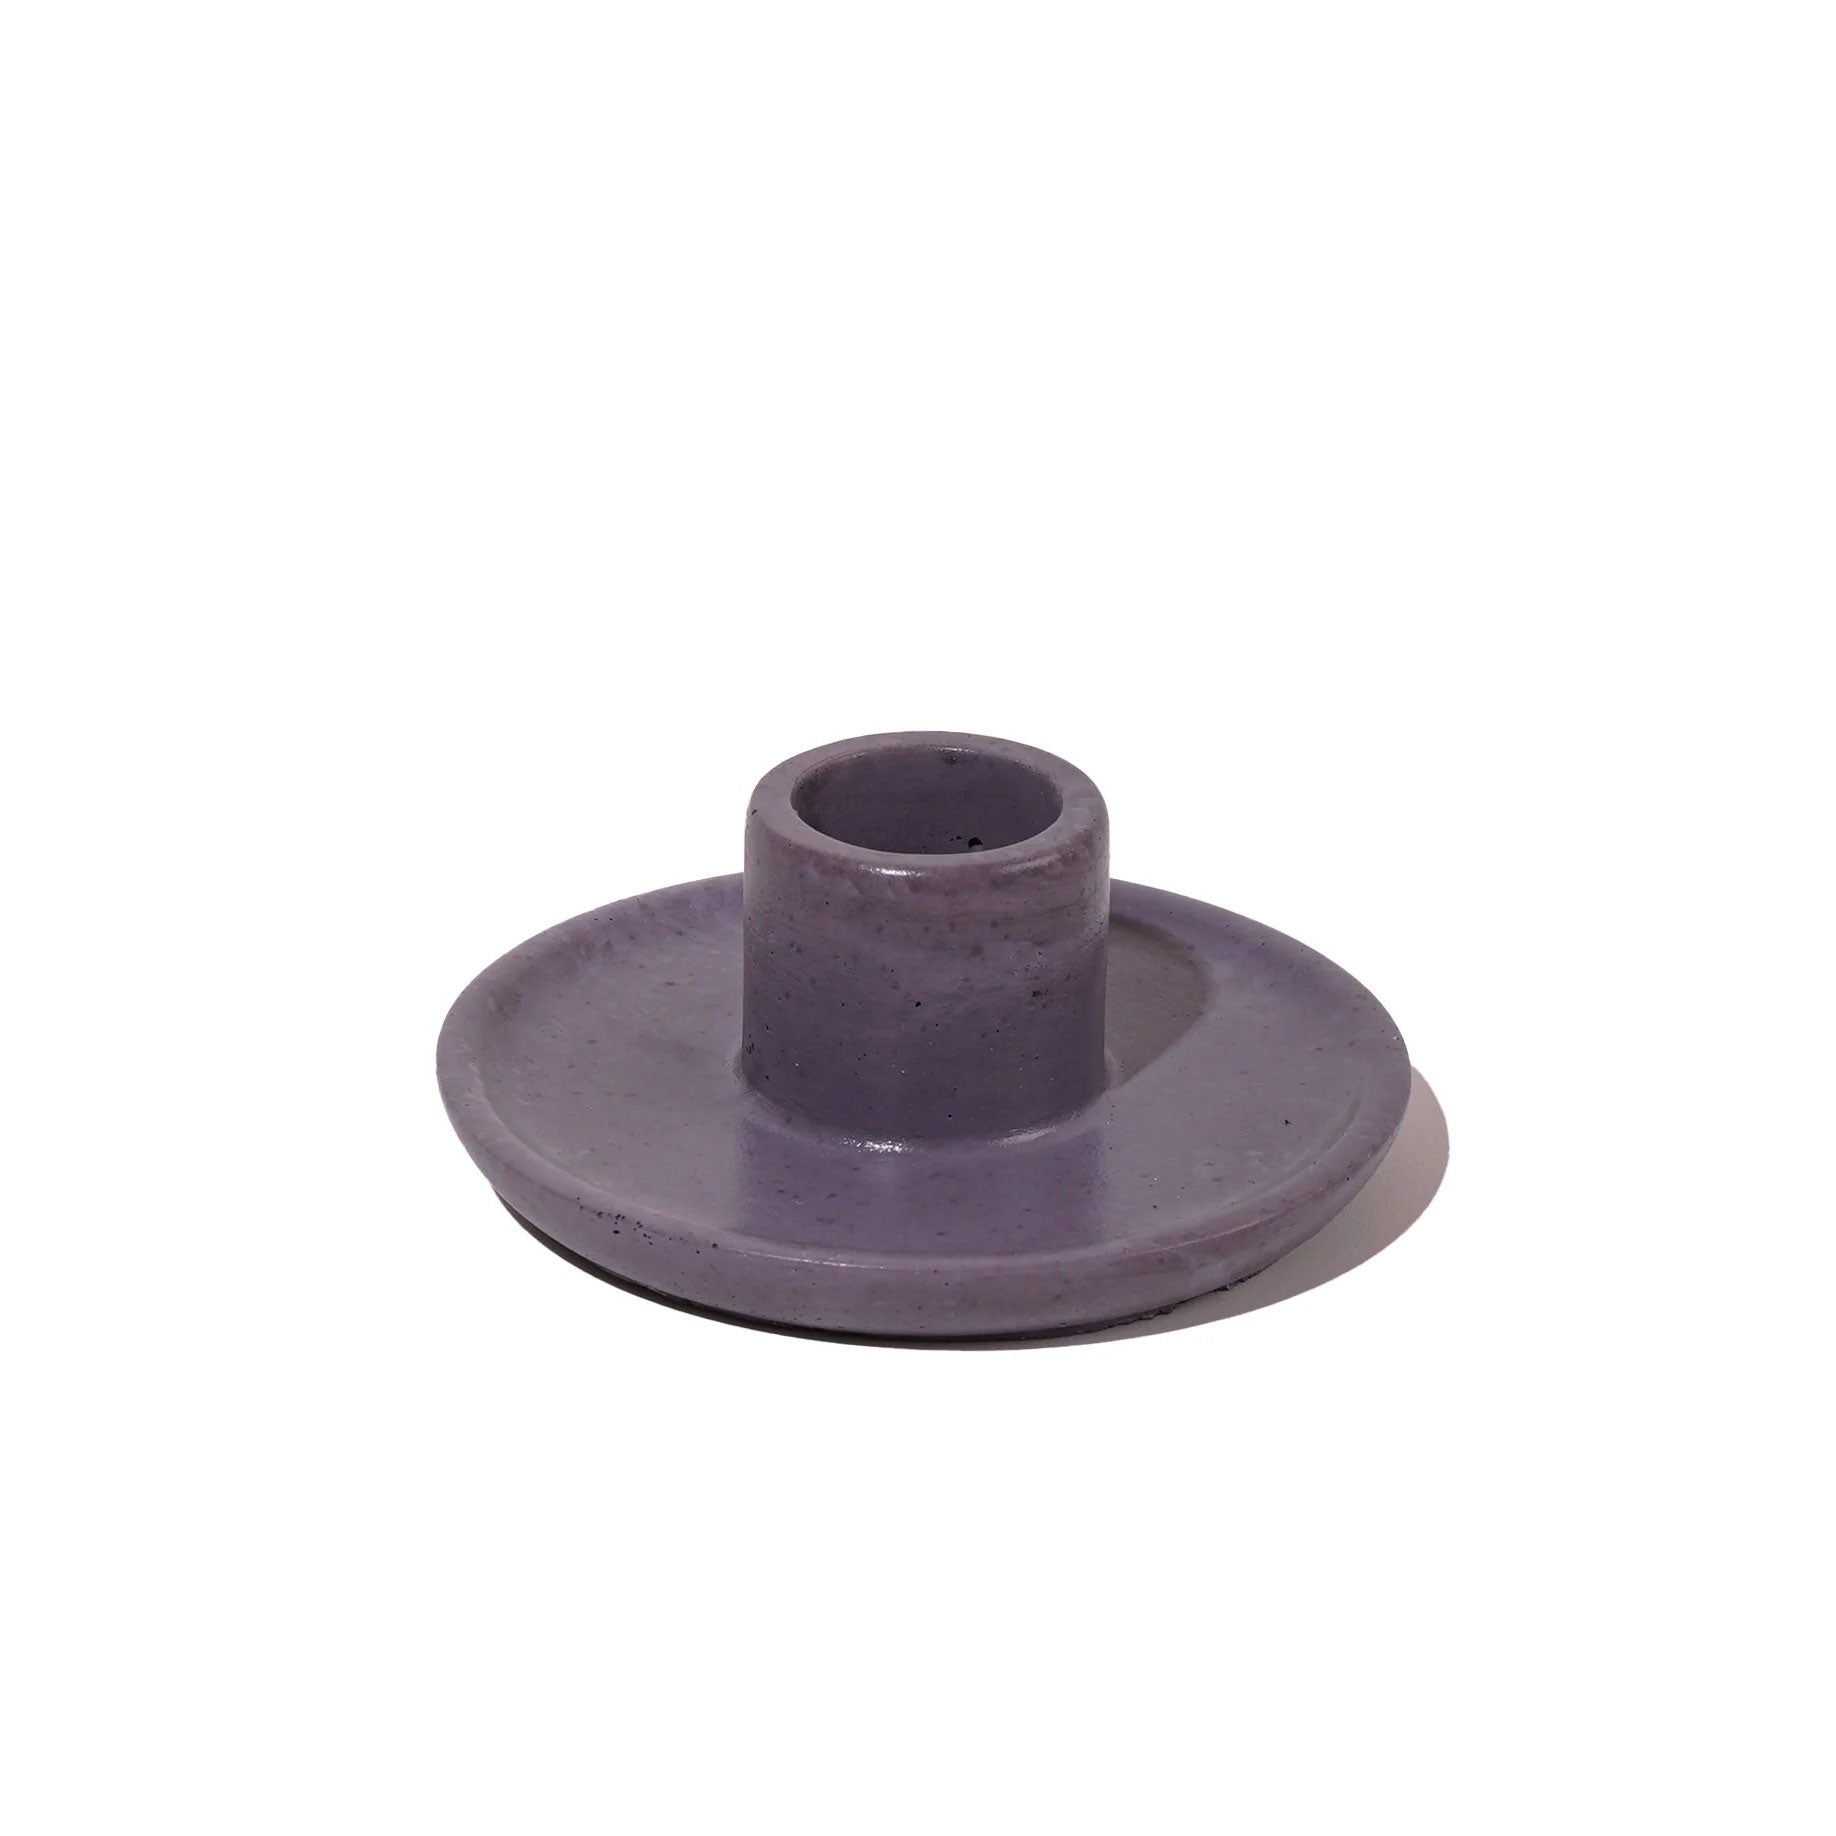 Ebb and Flow Mesa Concrete Candlestick Holder